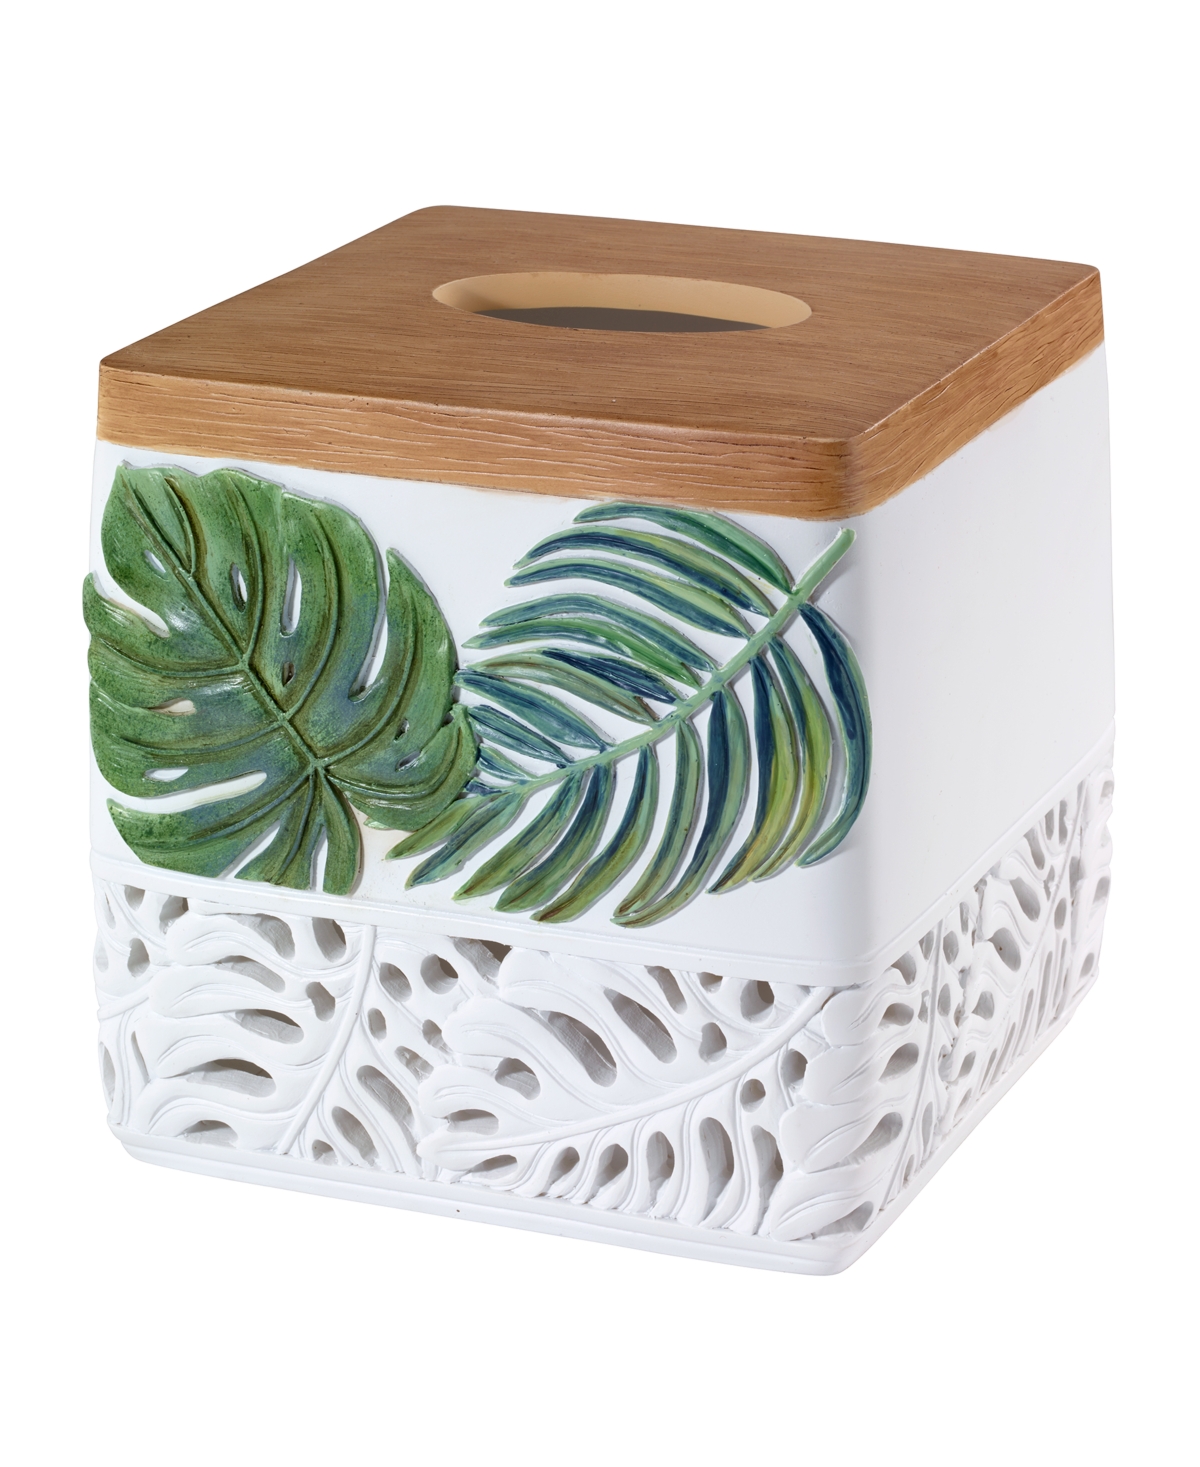 Viva Palm Leaf Cut-Out Resin Tissue Box Cover - Green